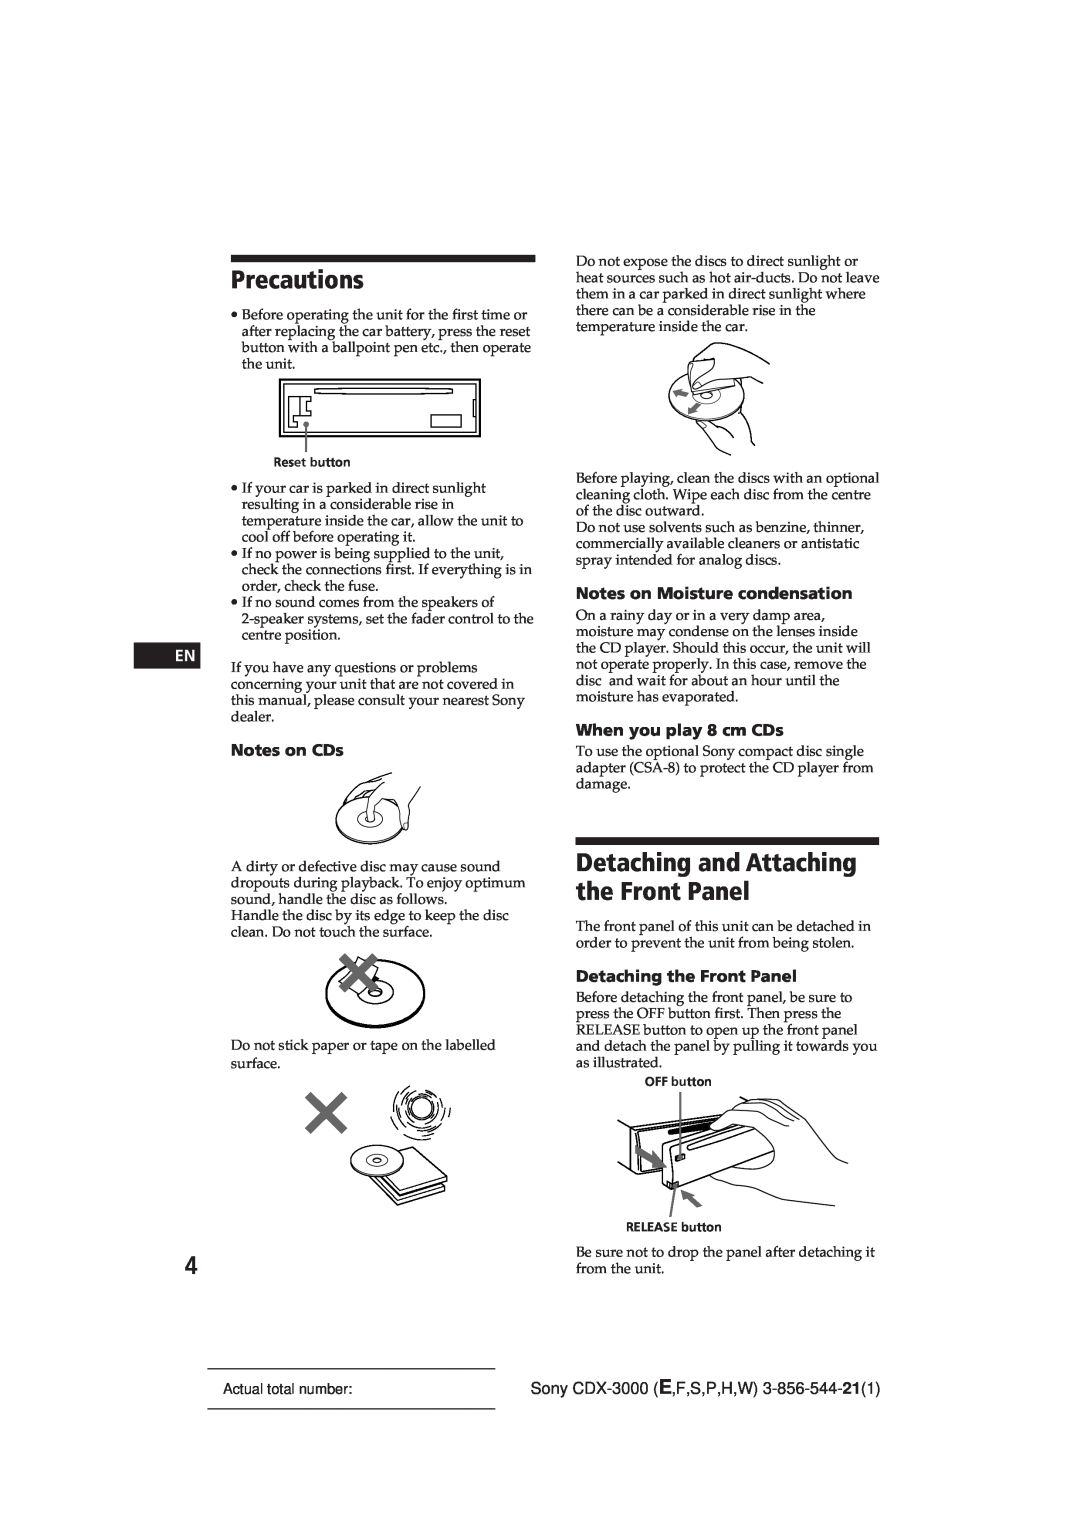 Sony CDX-3000 manual Precautions, Detaching and Attaching the Front Panel, Notes on CDs, Notes on Moisture condensation 